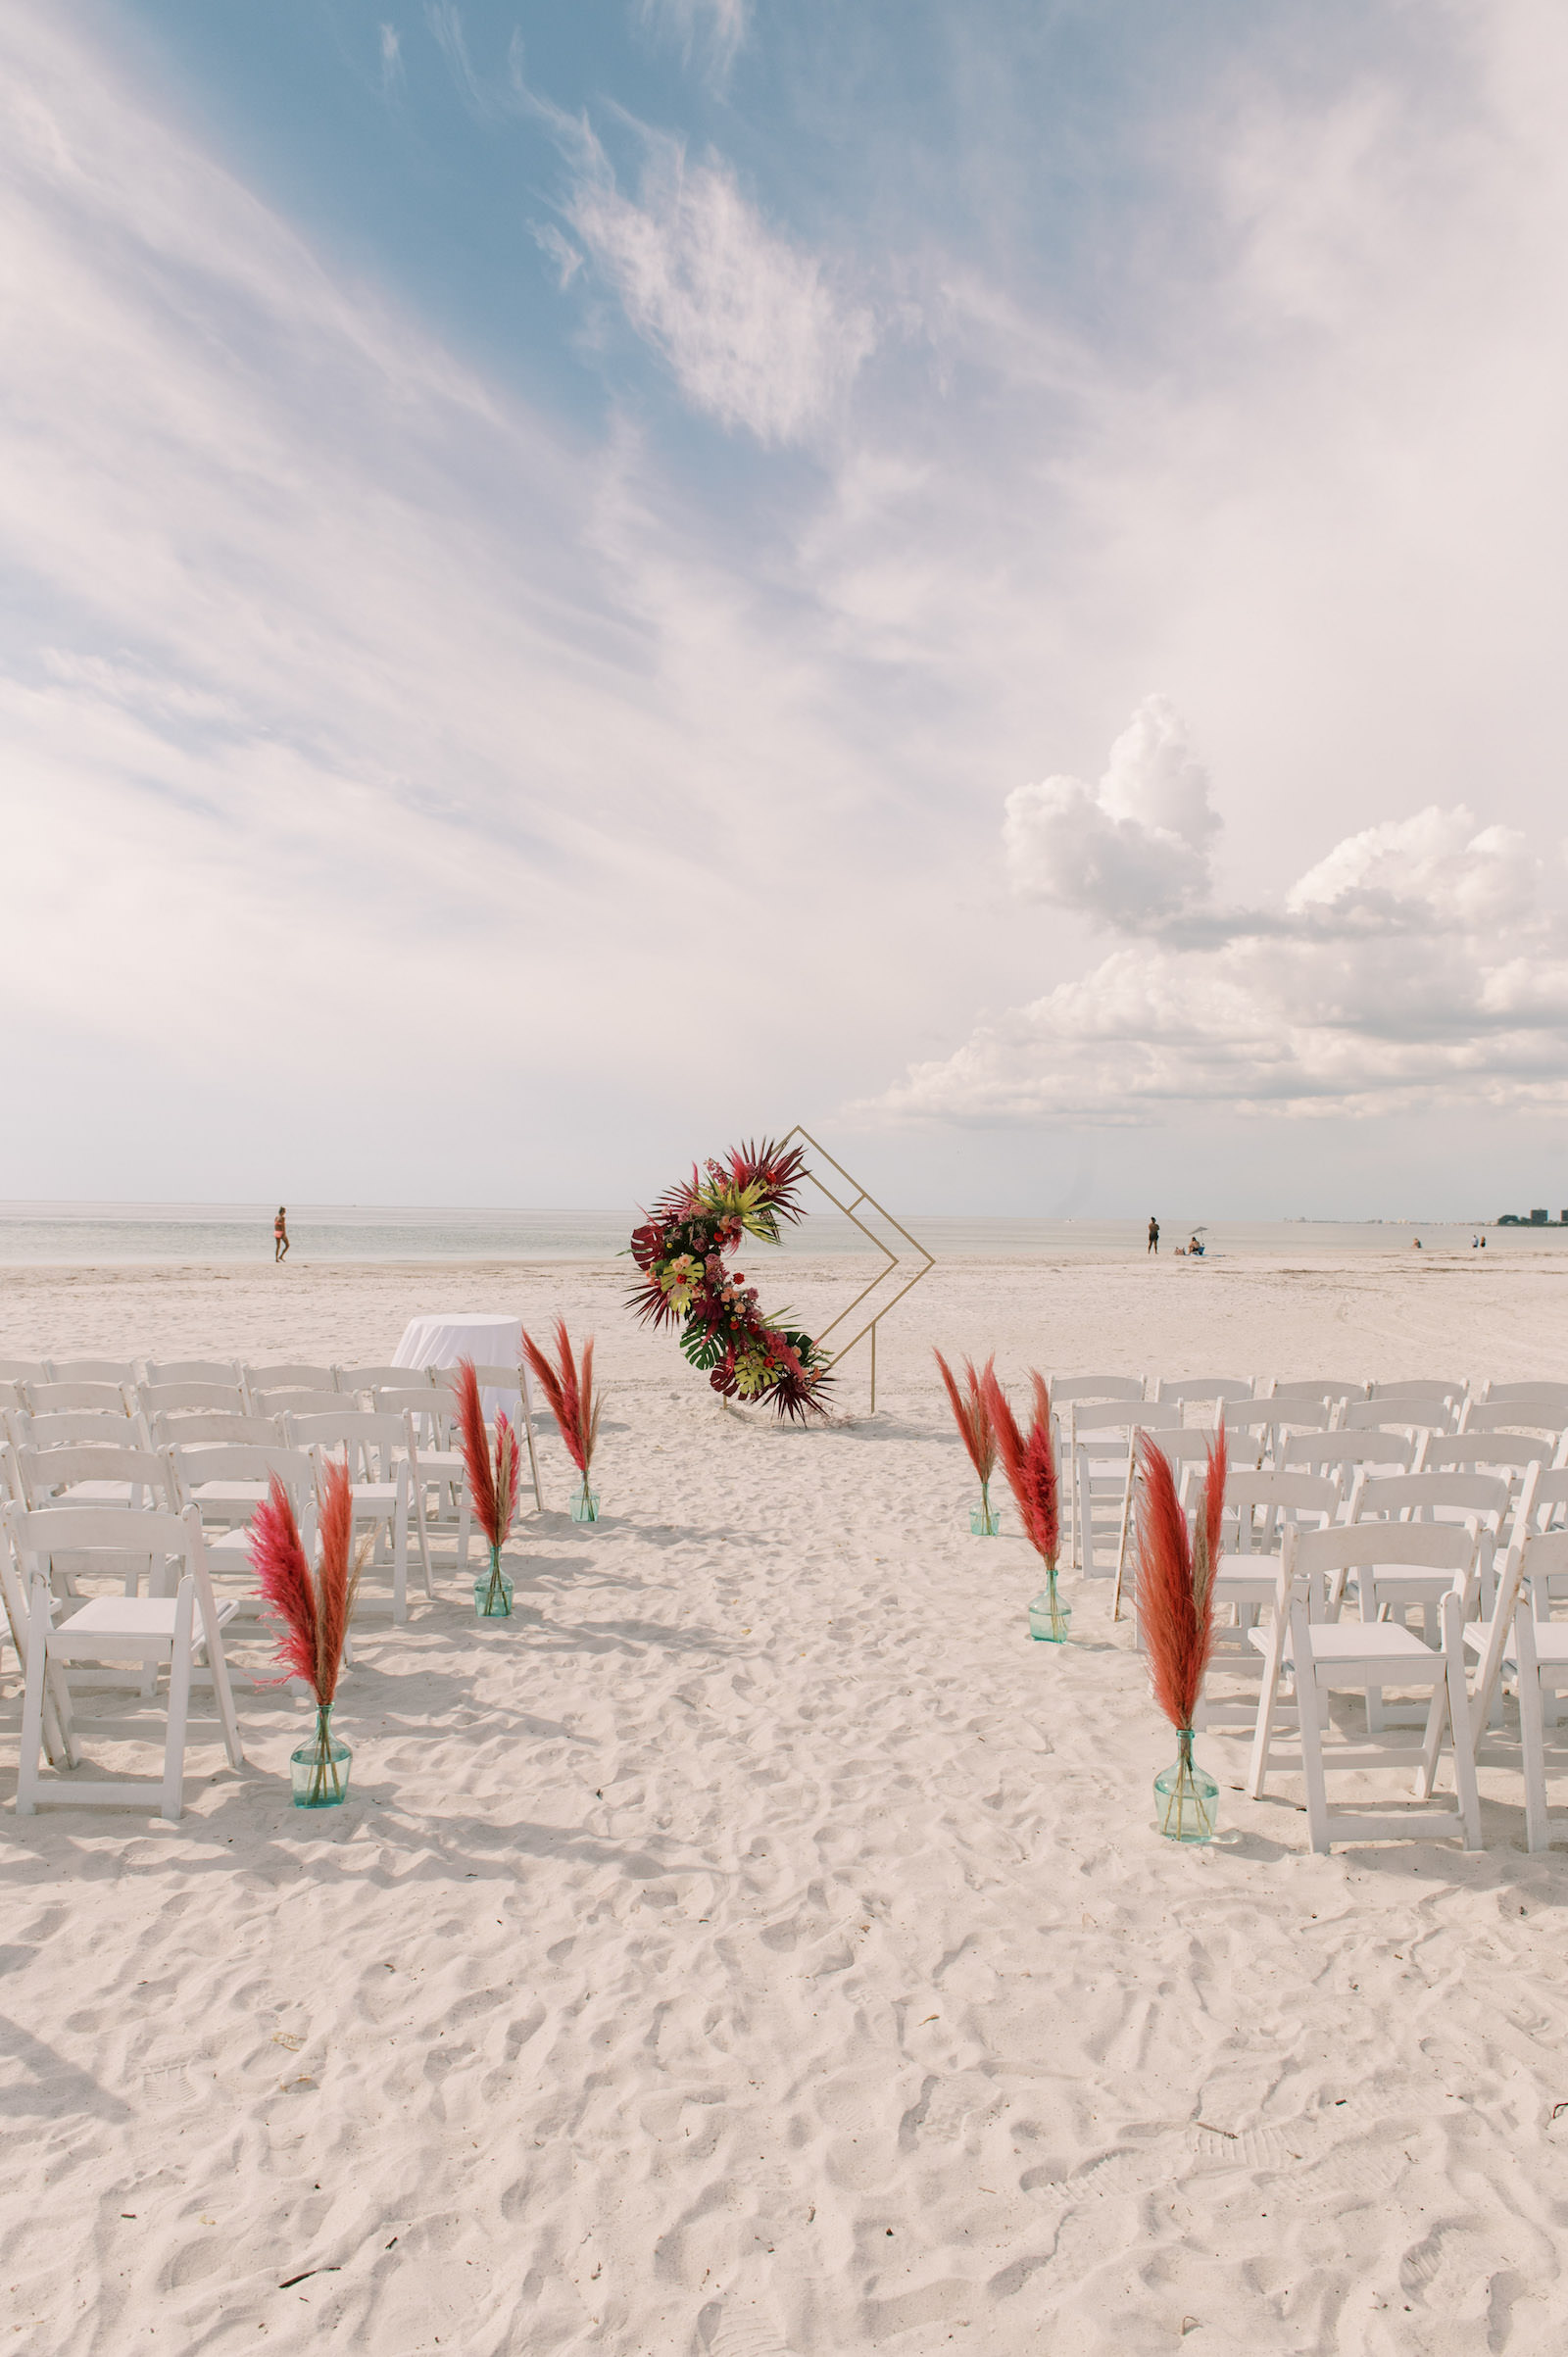 Vibrant Boho Beach Wedding, Red Pampas Grass in Vases Lining the Wedding Ceremony Aisle, Geometric Diamond Shaped Arch with Tropical Floral Arrangements | St. Pete Beach Wedding Venue The Don CeSar